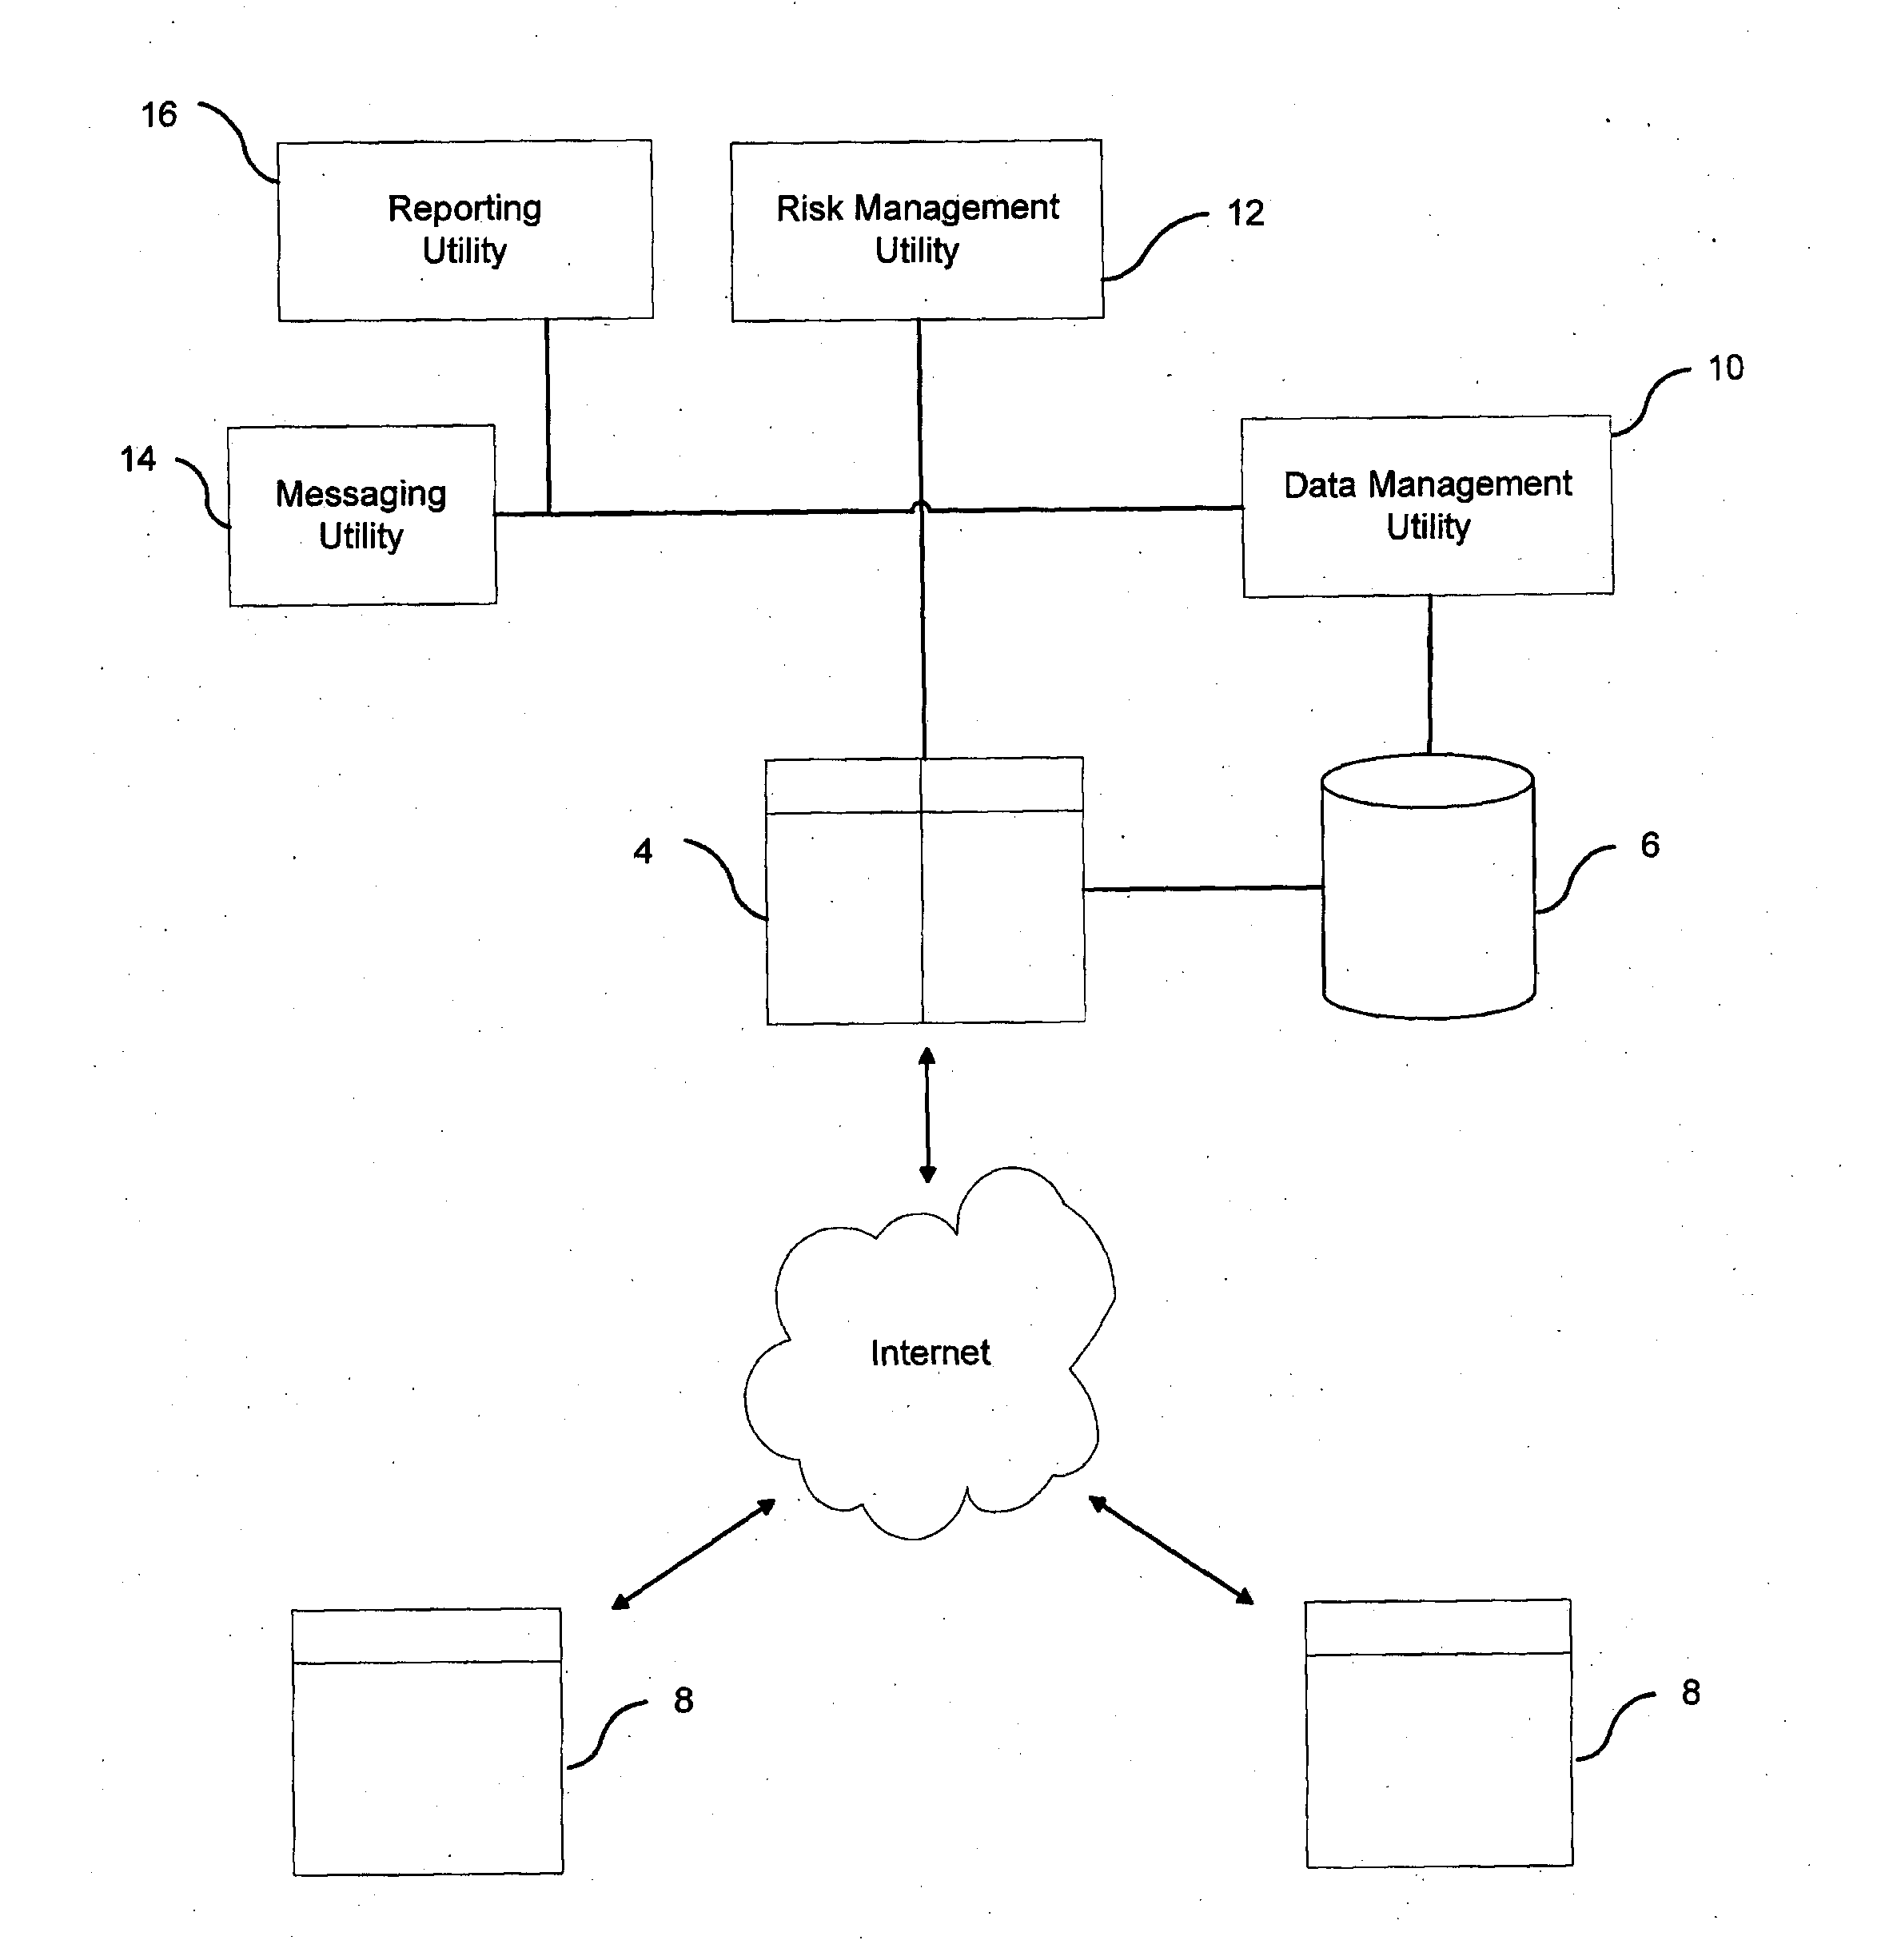 System, method and computer program for retention and optimization of gaming revenue and amelioration of negative gaming behaviour